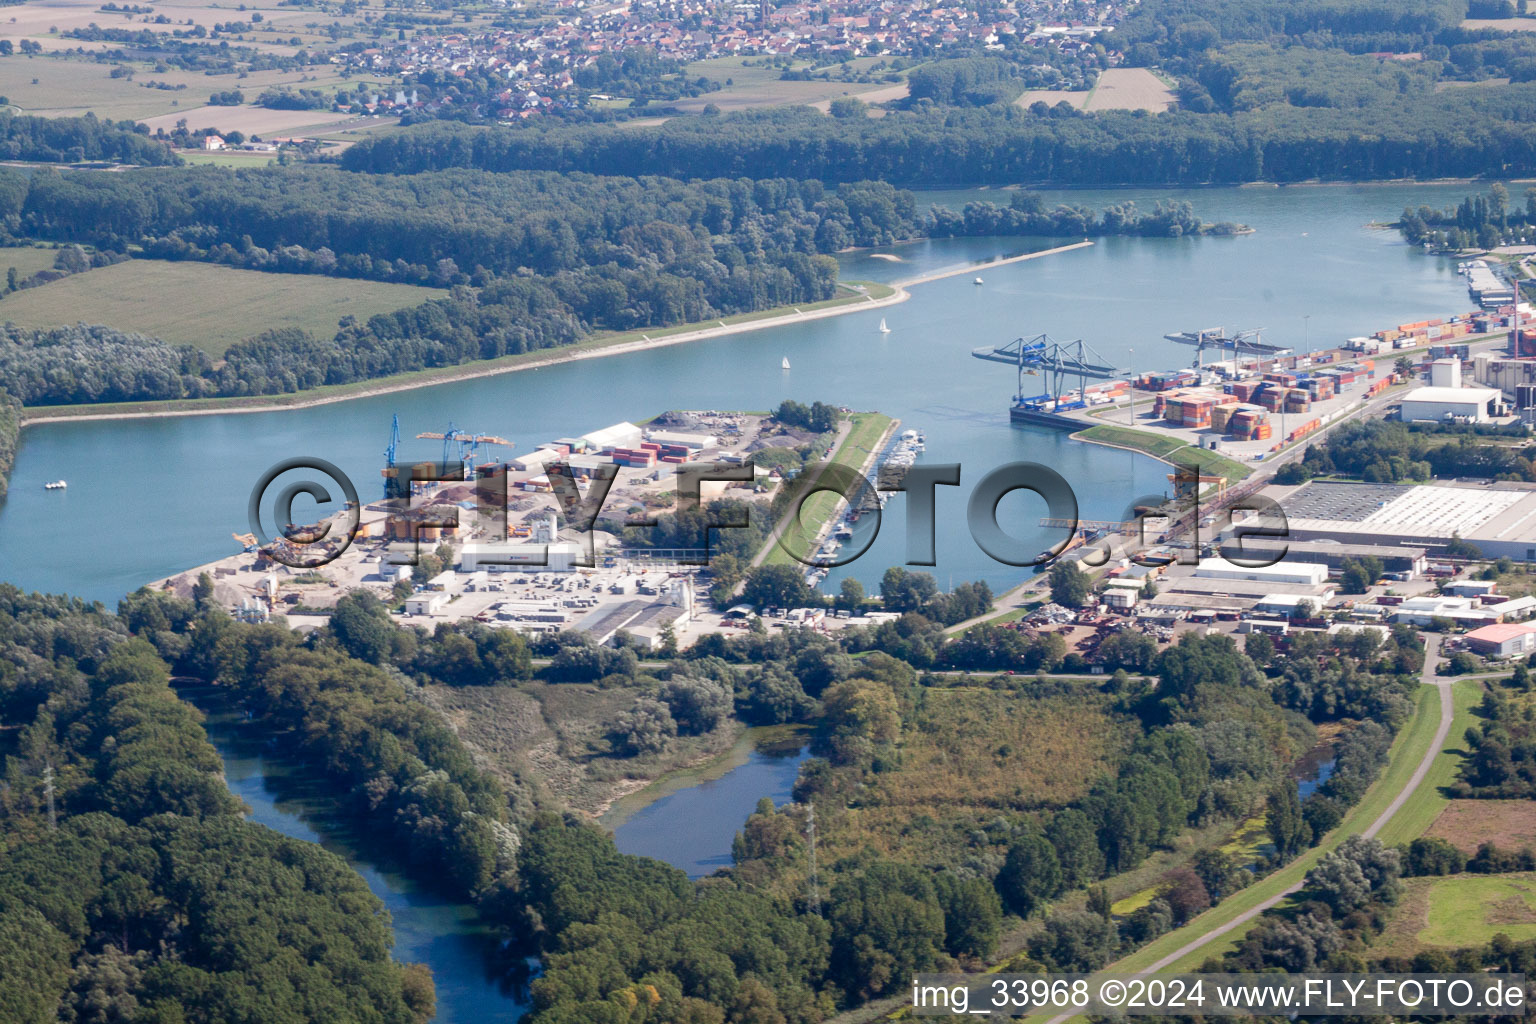 Aerial view of Quays and boat moorings at the port of the inland port of the Rhine river in Germersheim in the state Rhineland-Palatinate